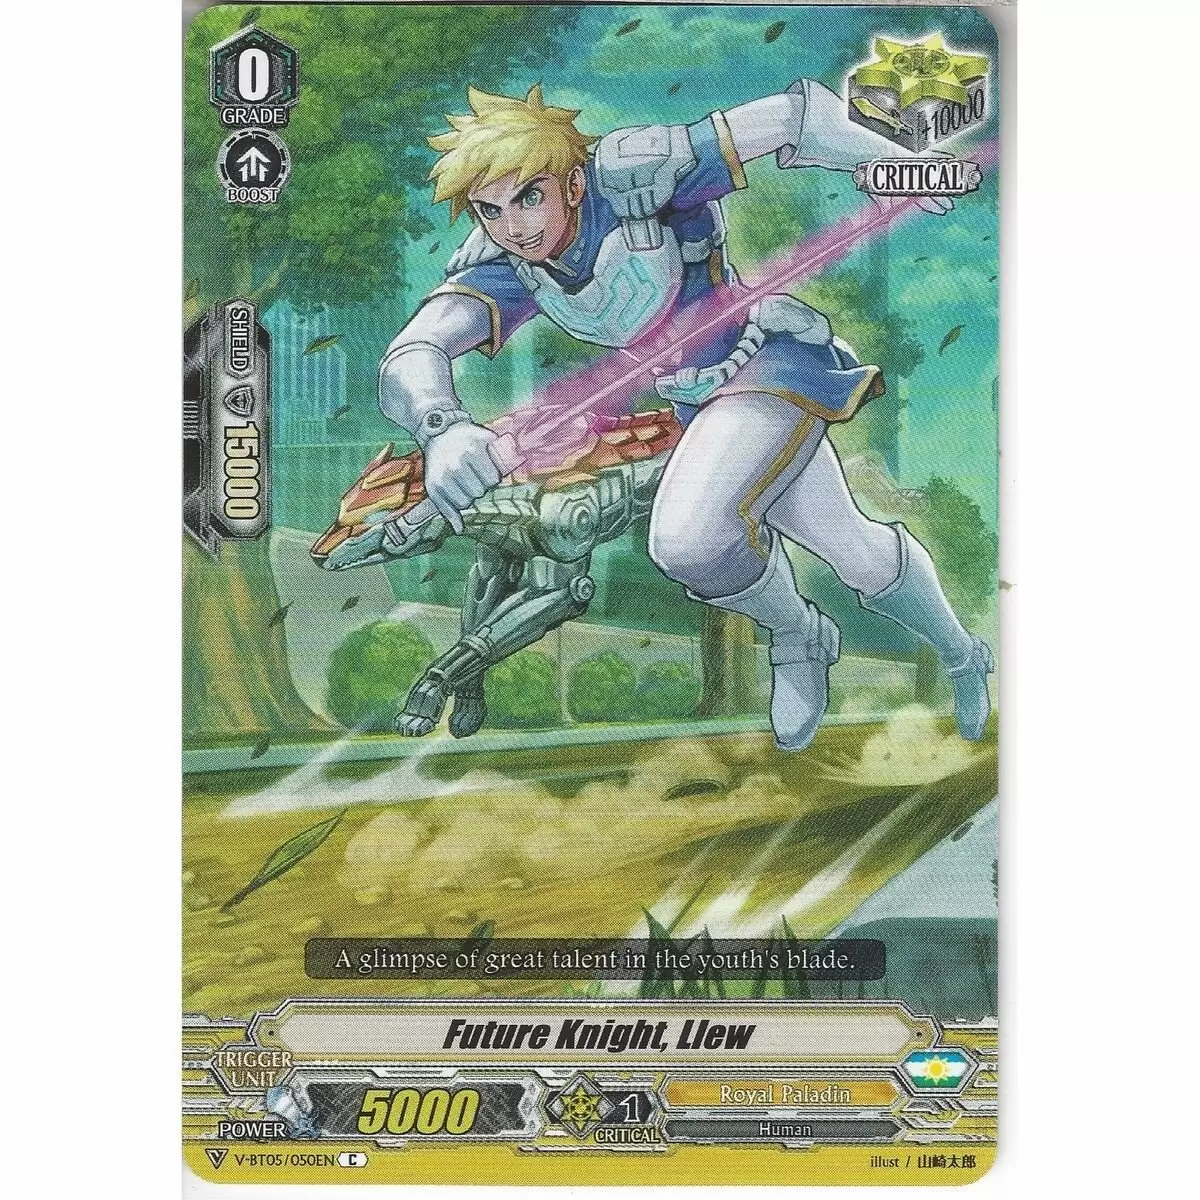 BT01 - Descent of the King of Knights - Future Knight, Llew